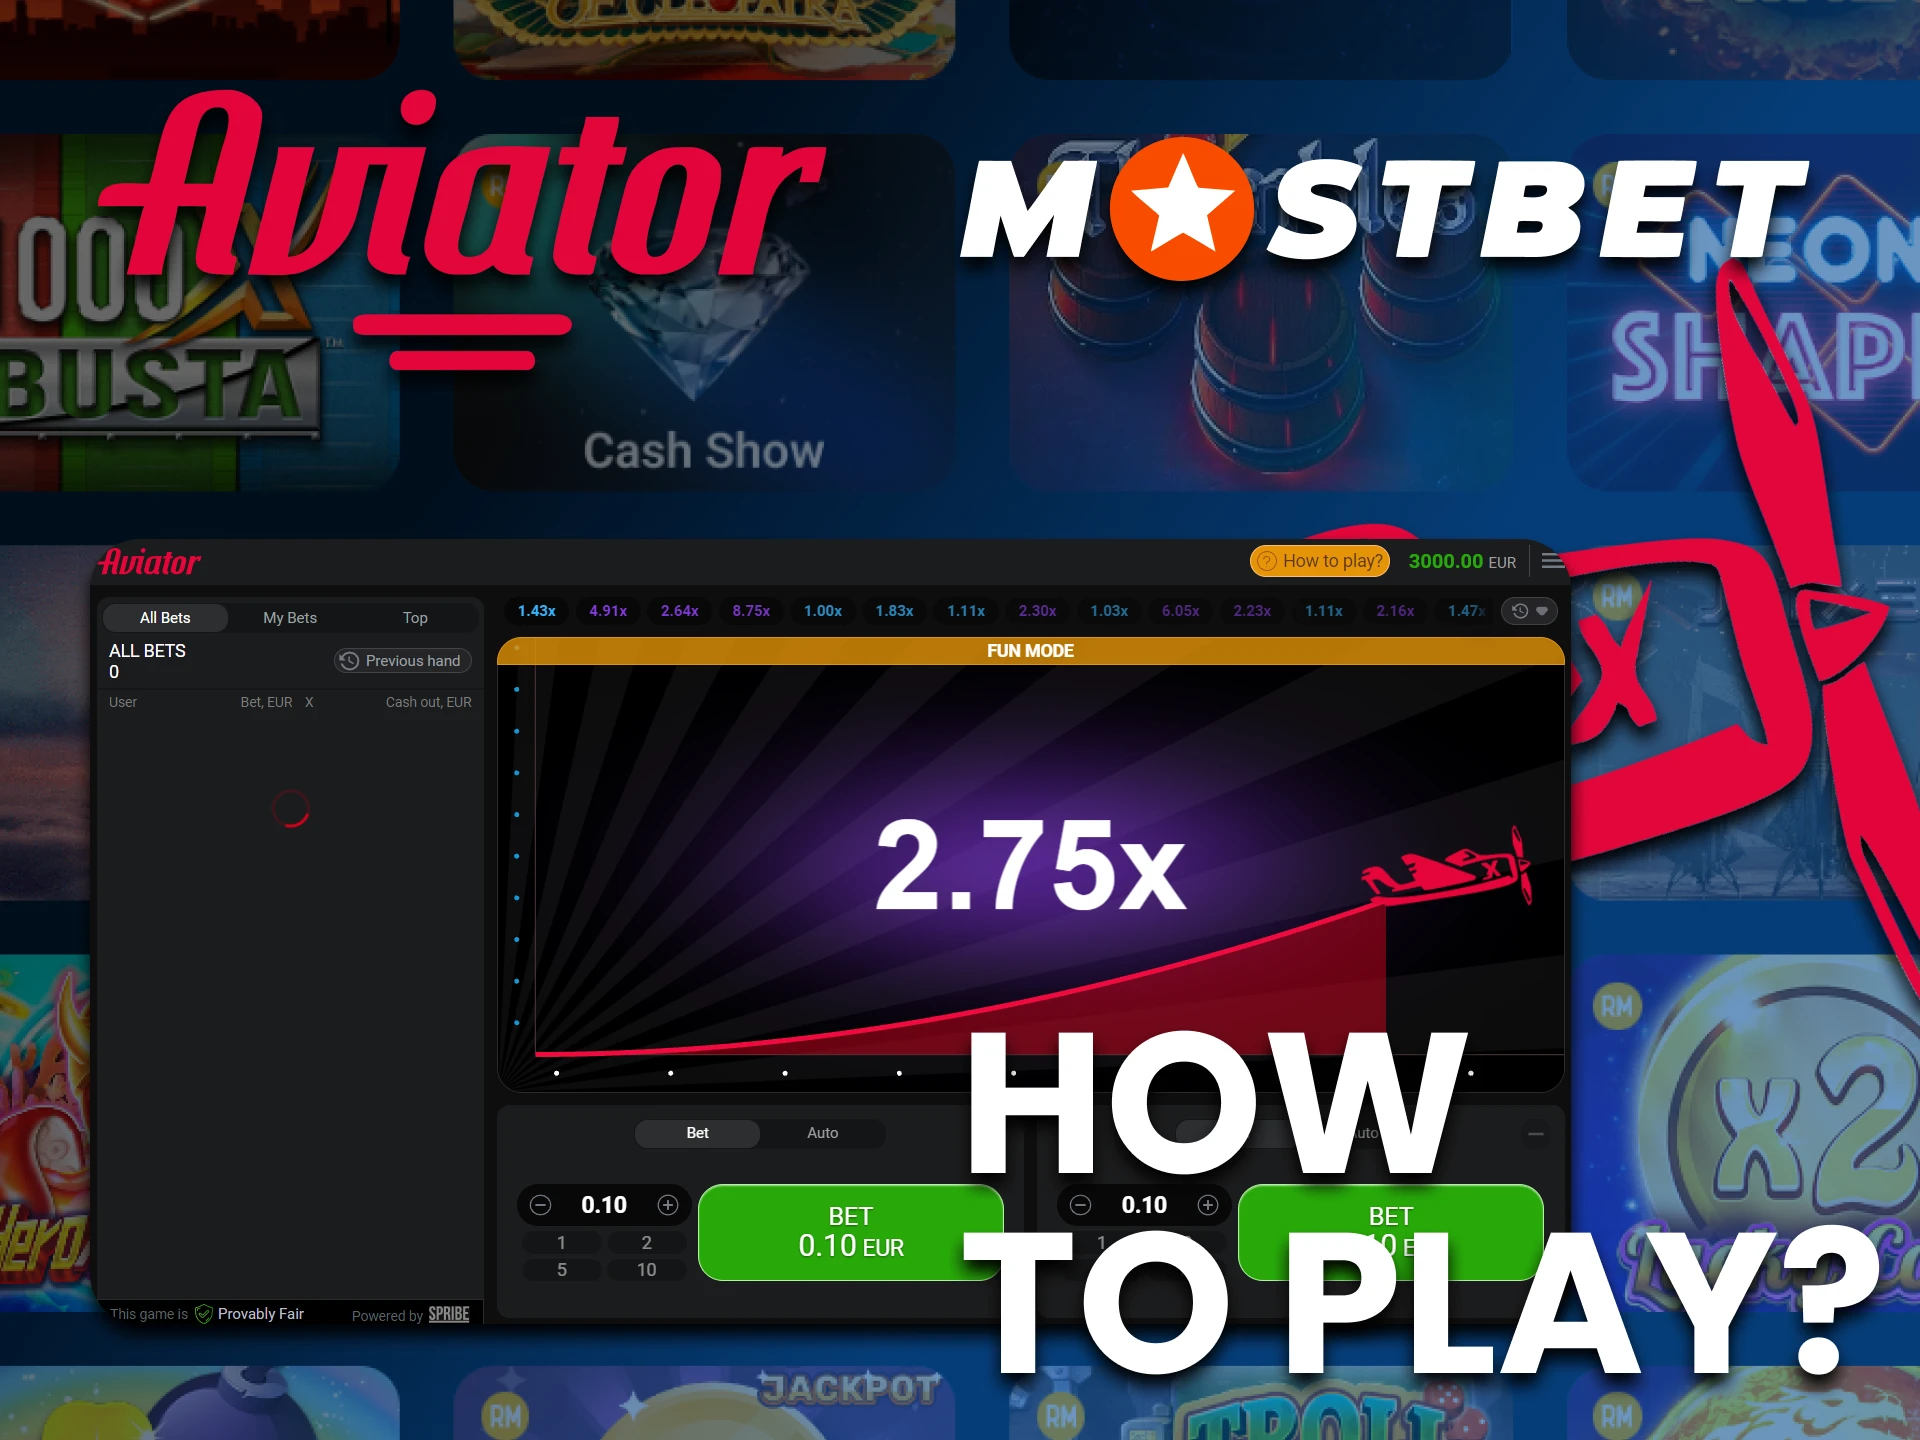 The rules of Aviator on Mostbet are simple.